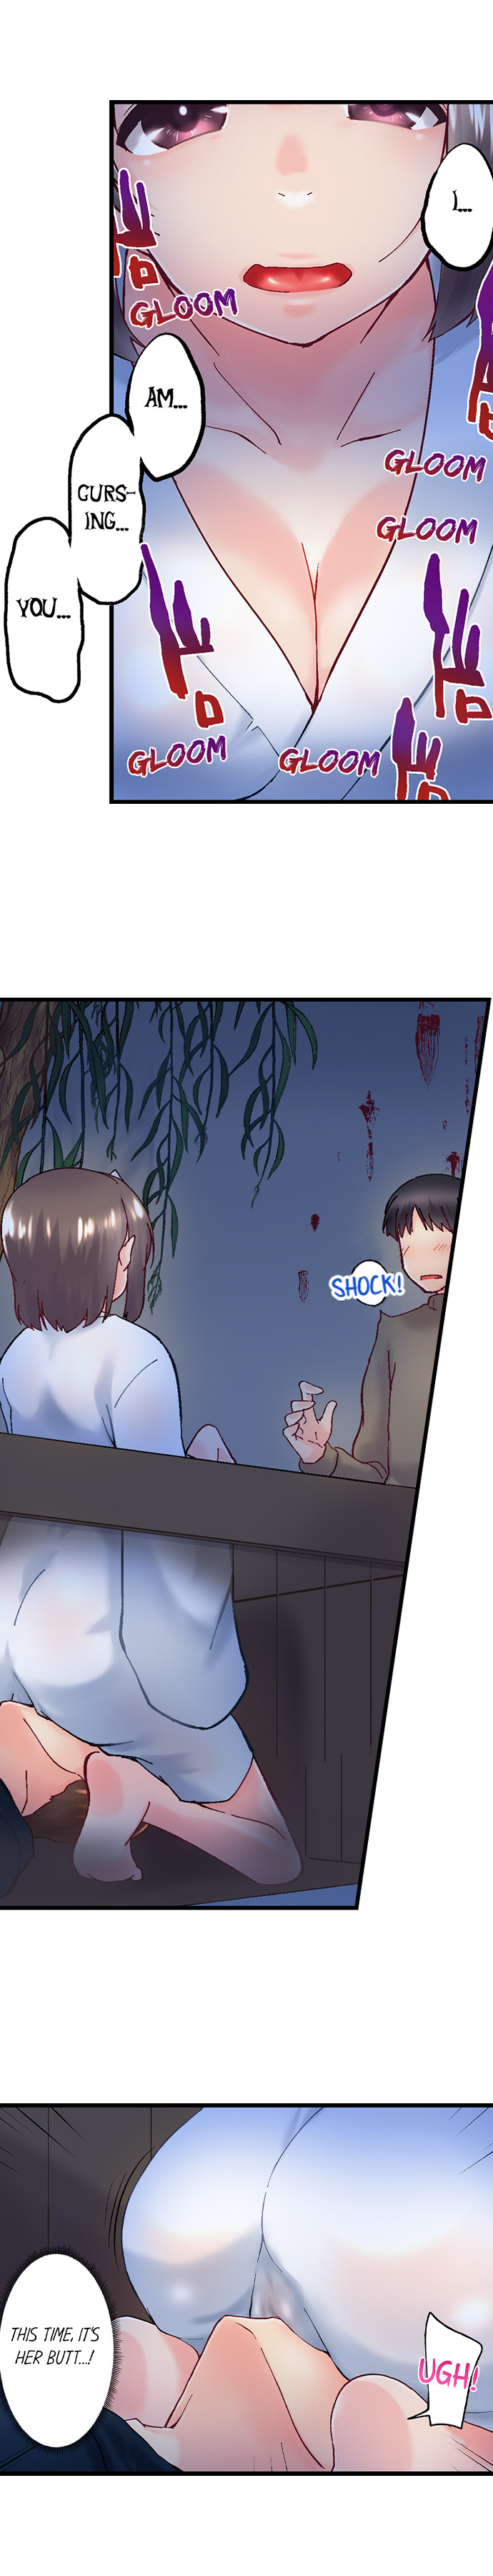 My Brother’s Slipped Inside Me in The Bathtub - Chapter 98 Page 2